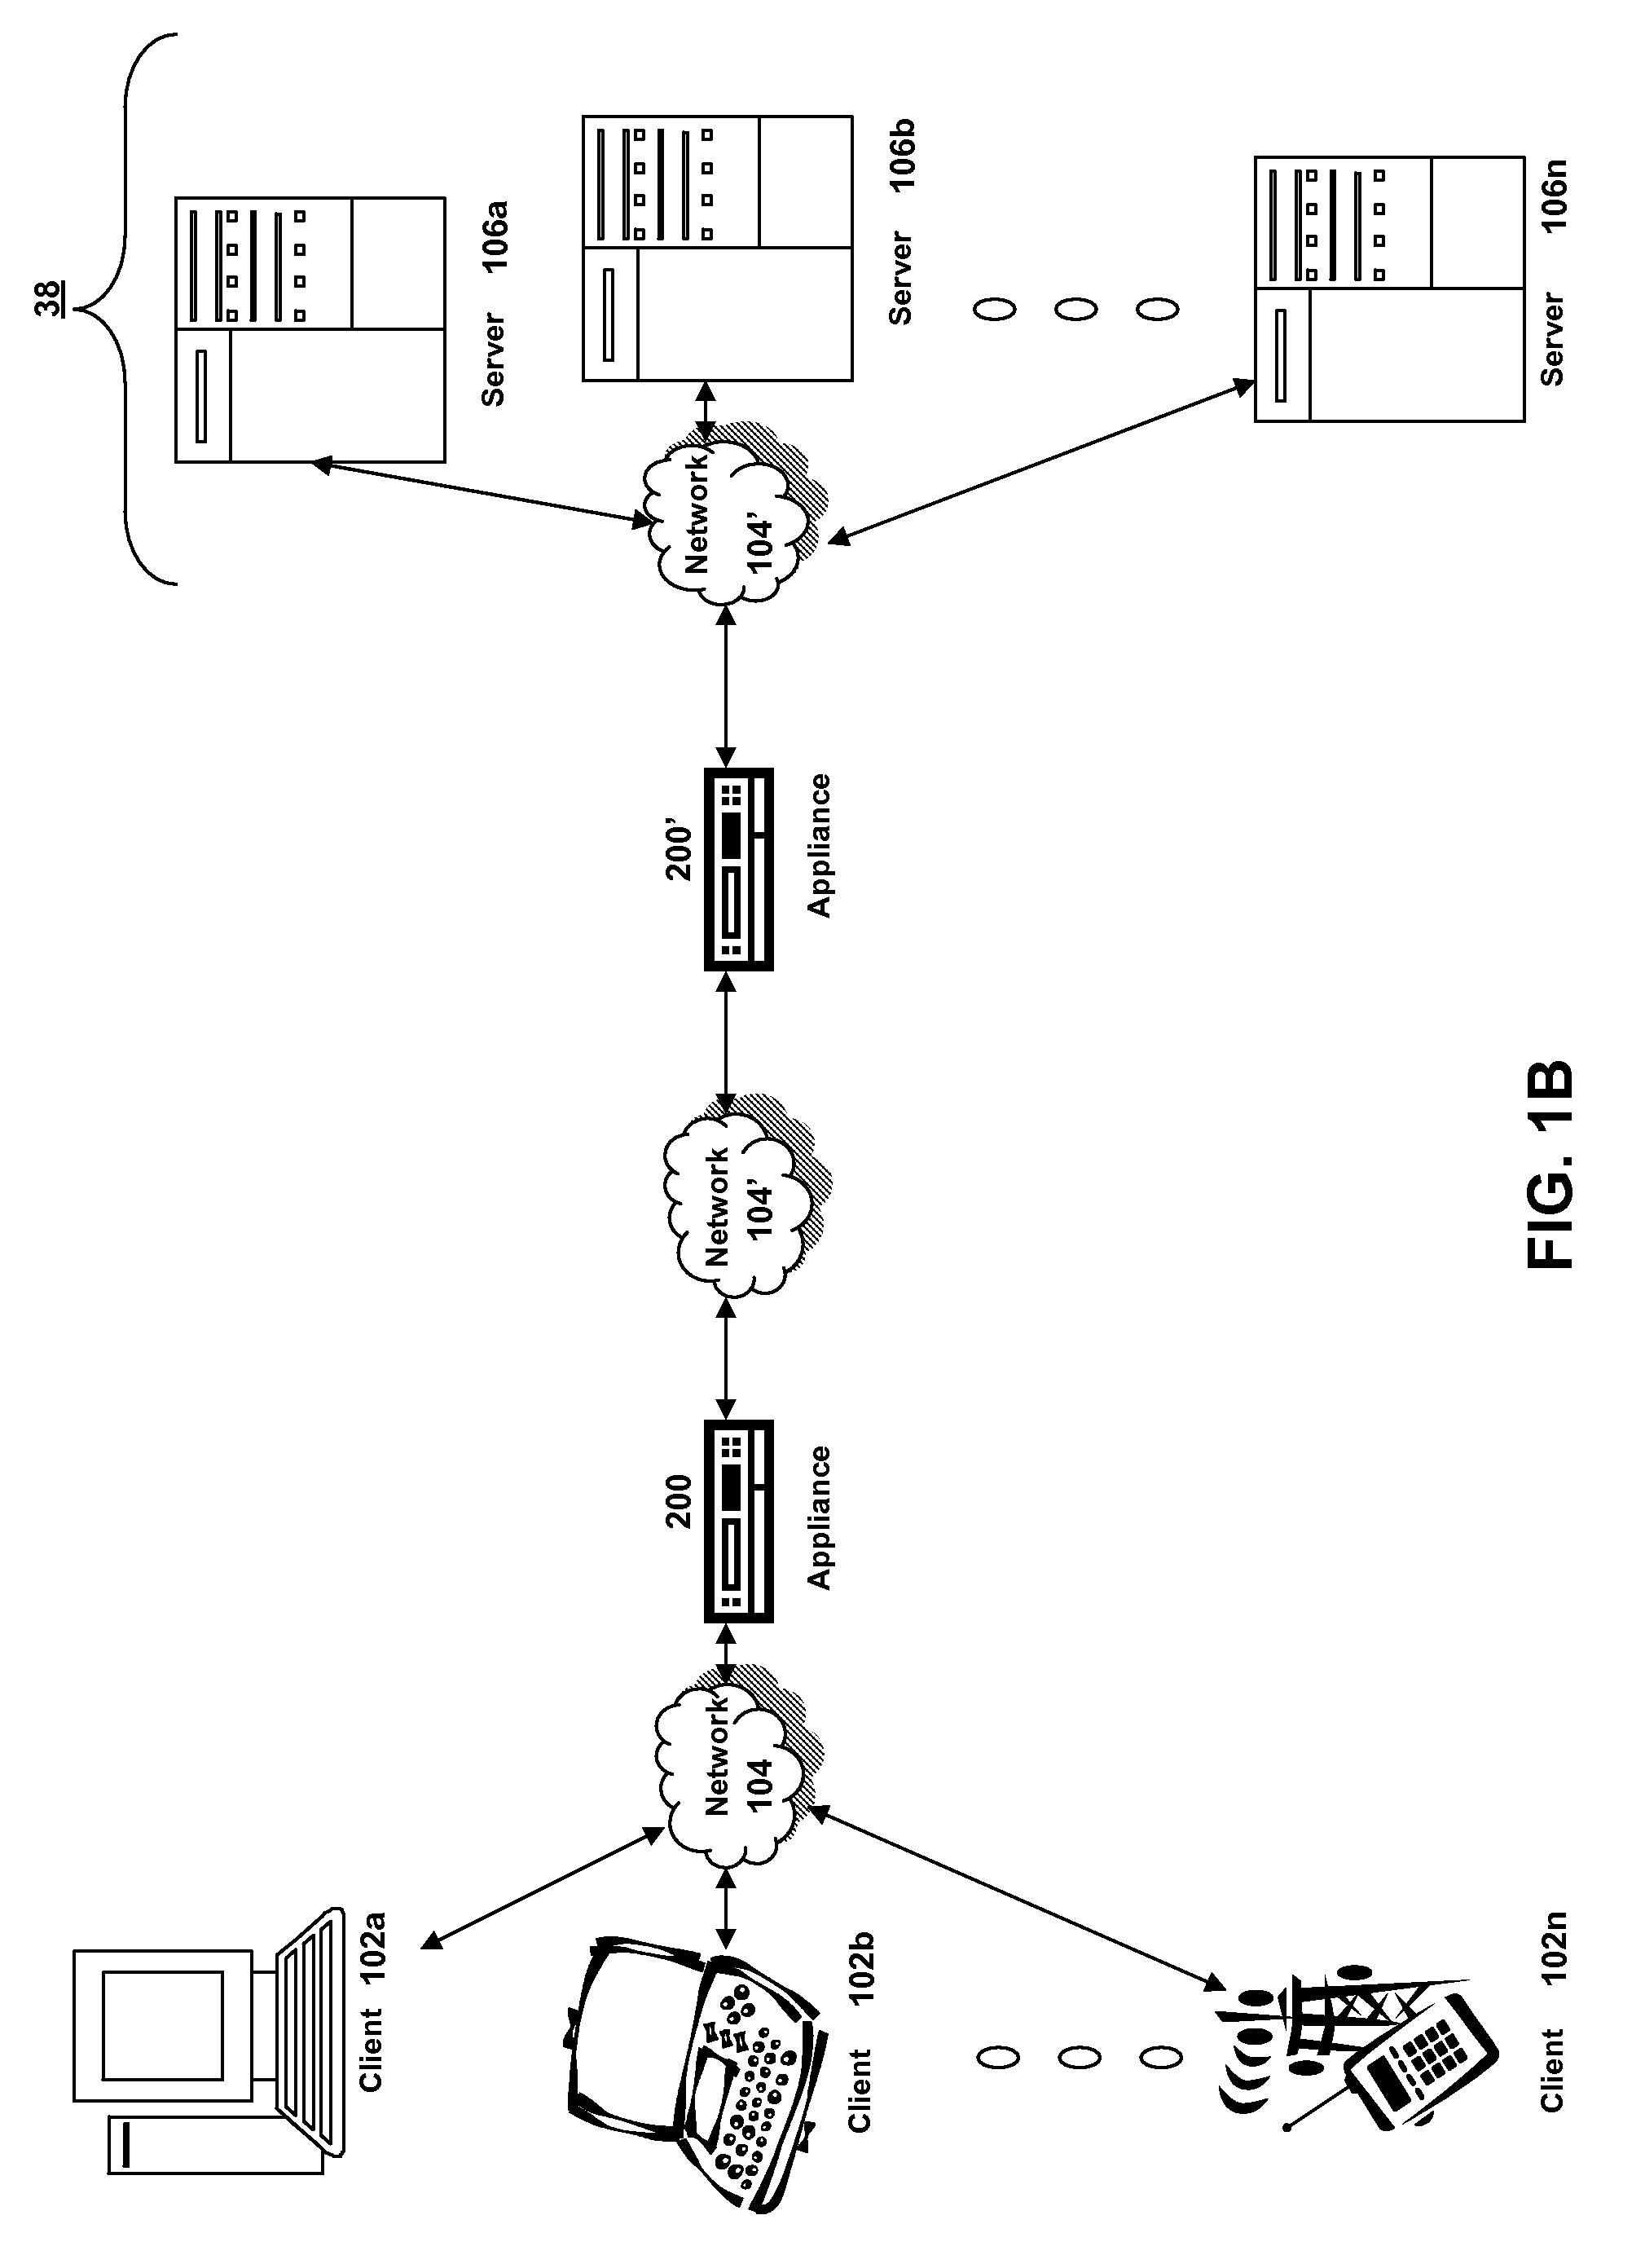 Systems and methods for providing stuctured policy expressions to represent unstructured data in a network appliance